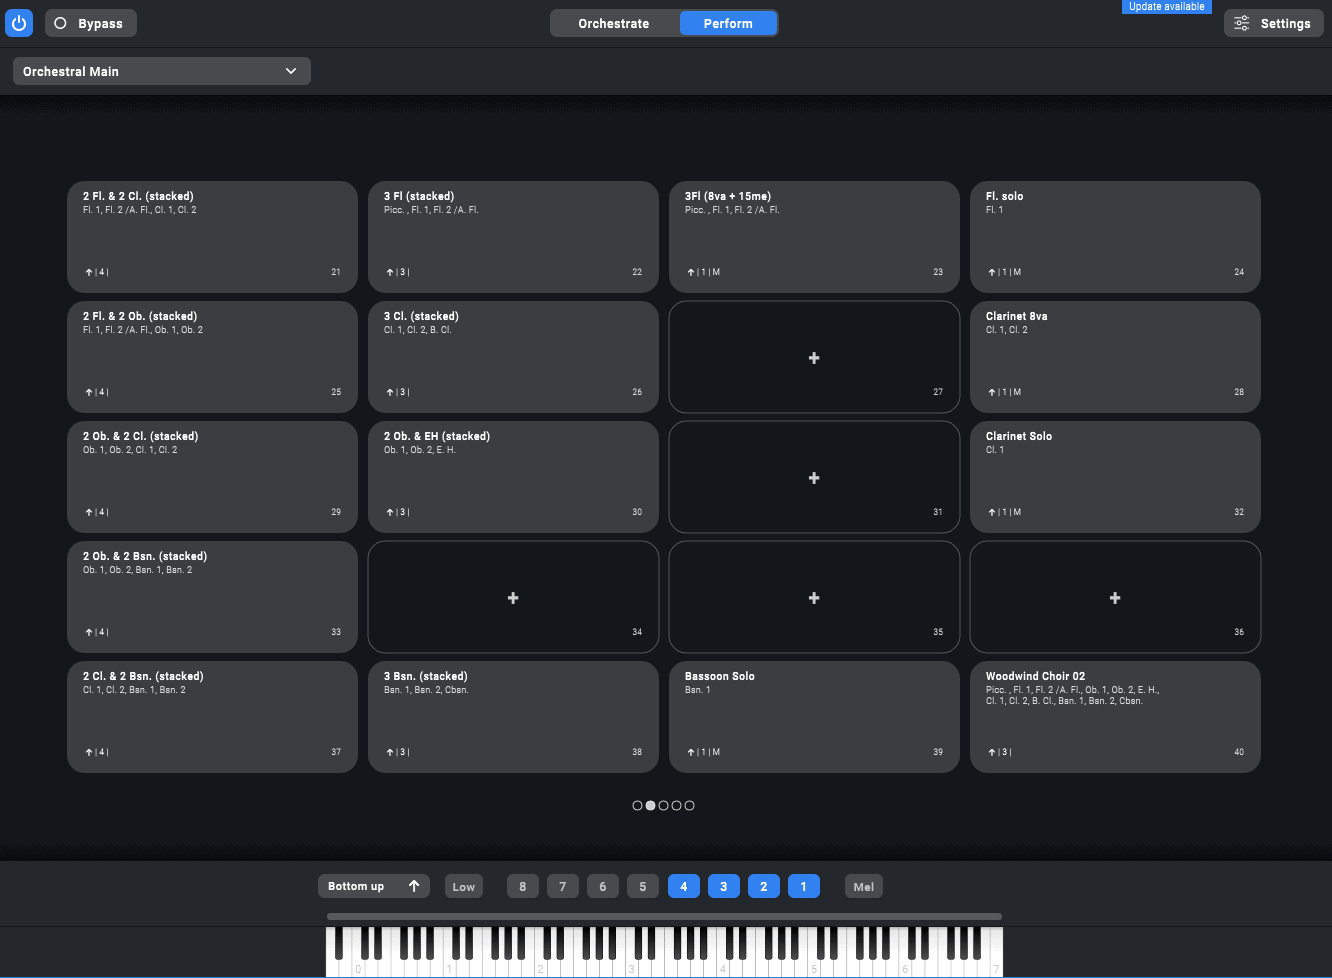 Organize your orchestrations on the perform page.